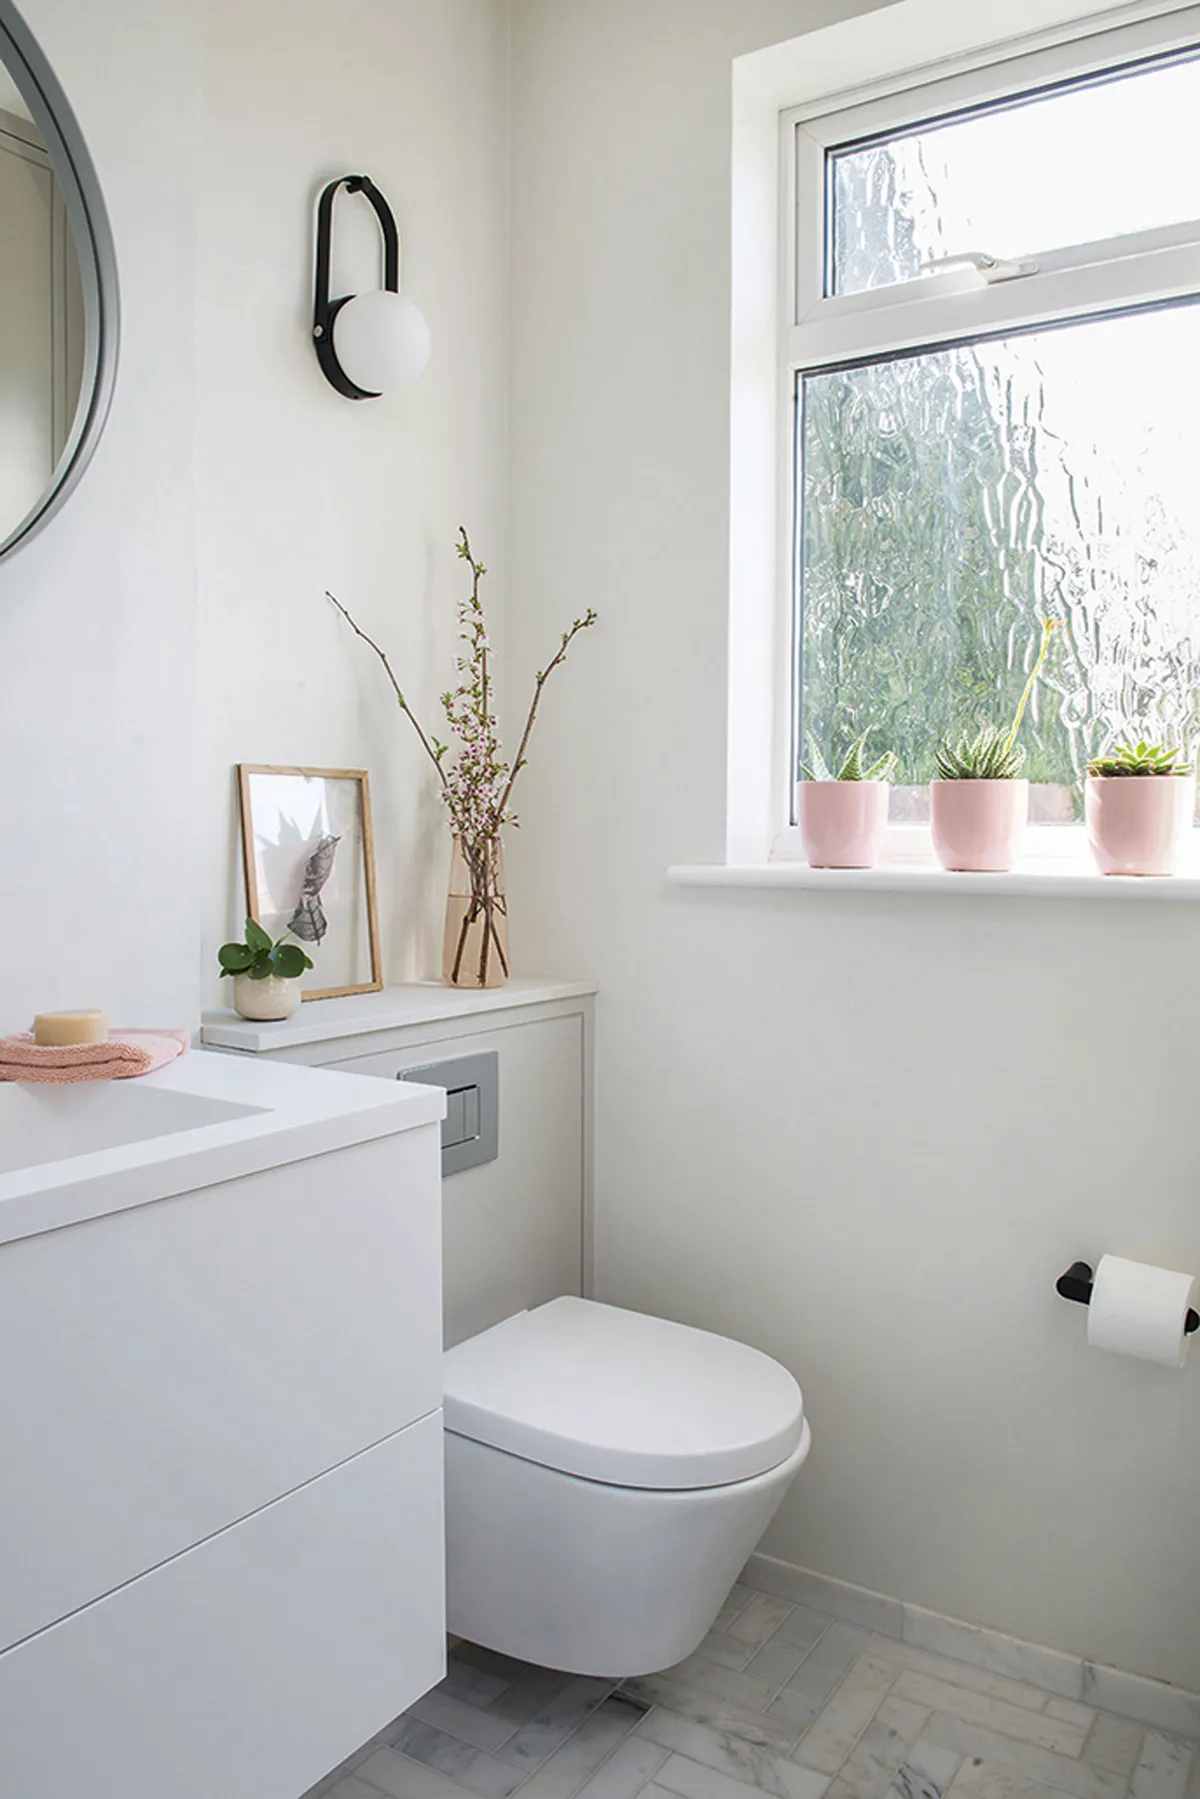 Bathroom makeover: 'Downsizing has made a big difference'